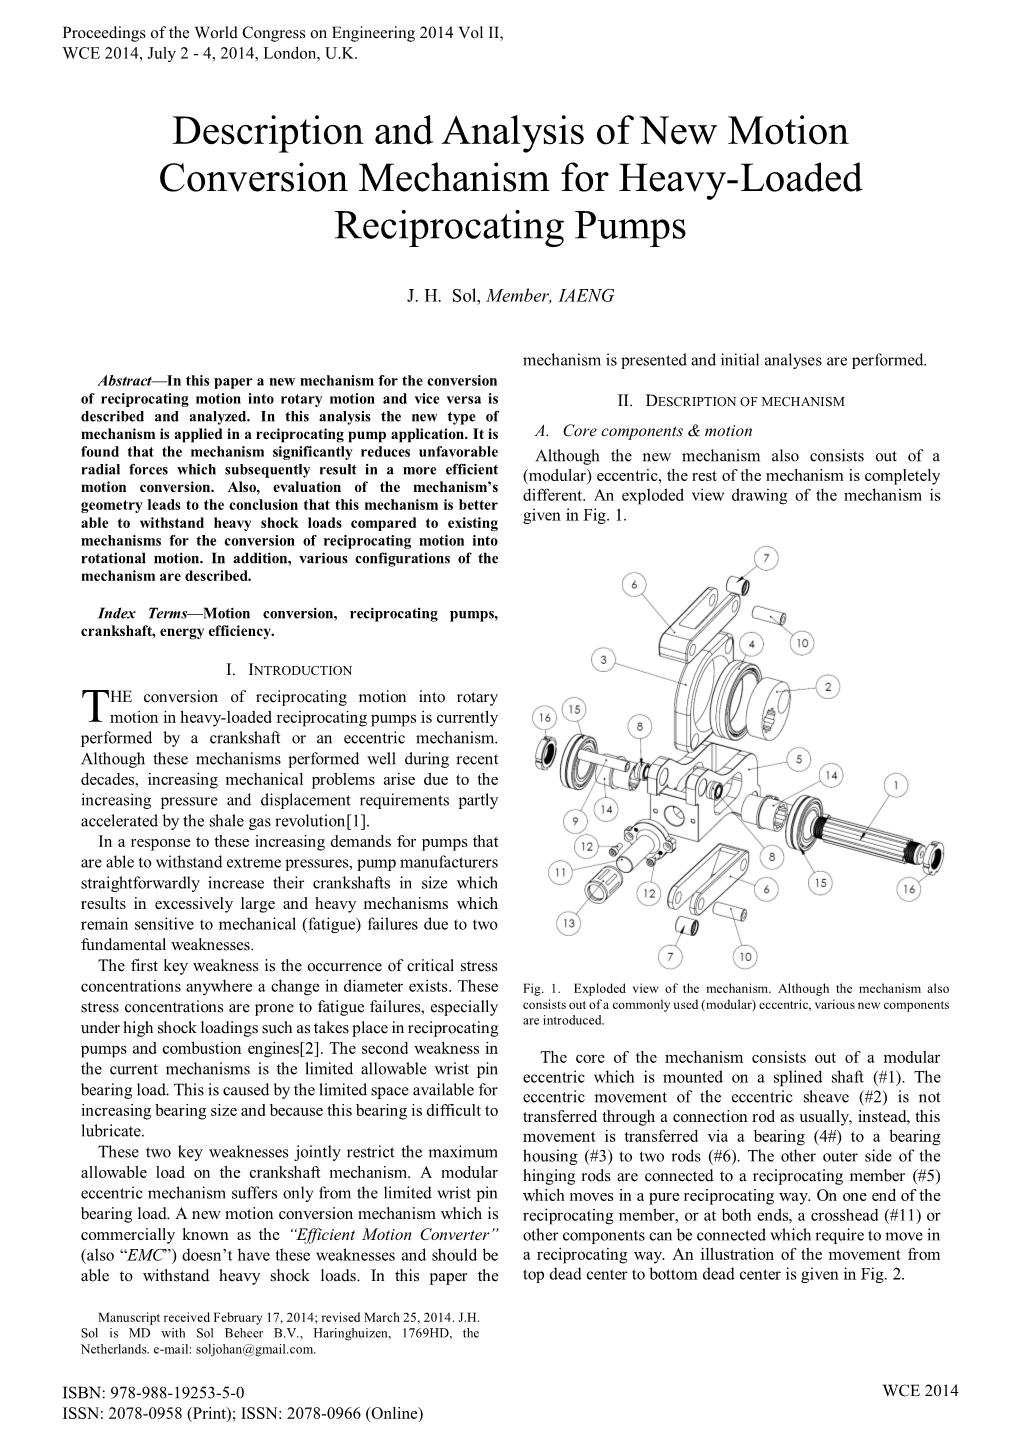 Description and Analysis of New Motion Conversion Mechanism for Heavy-Loaded Reciprocating Pumps